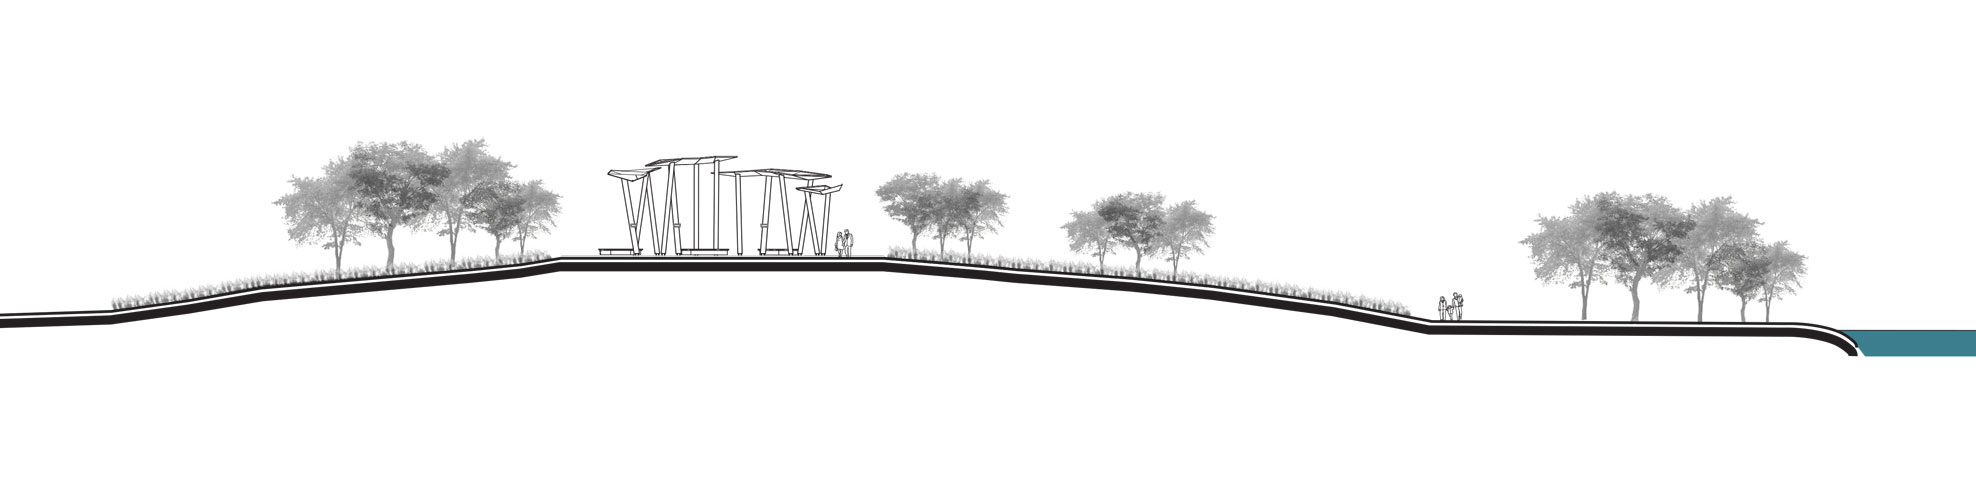 a drawing of a park with trees and a bridge.